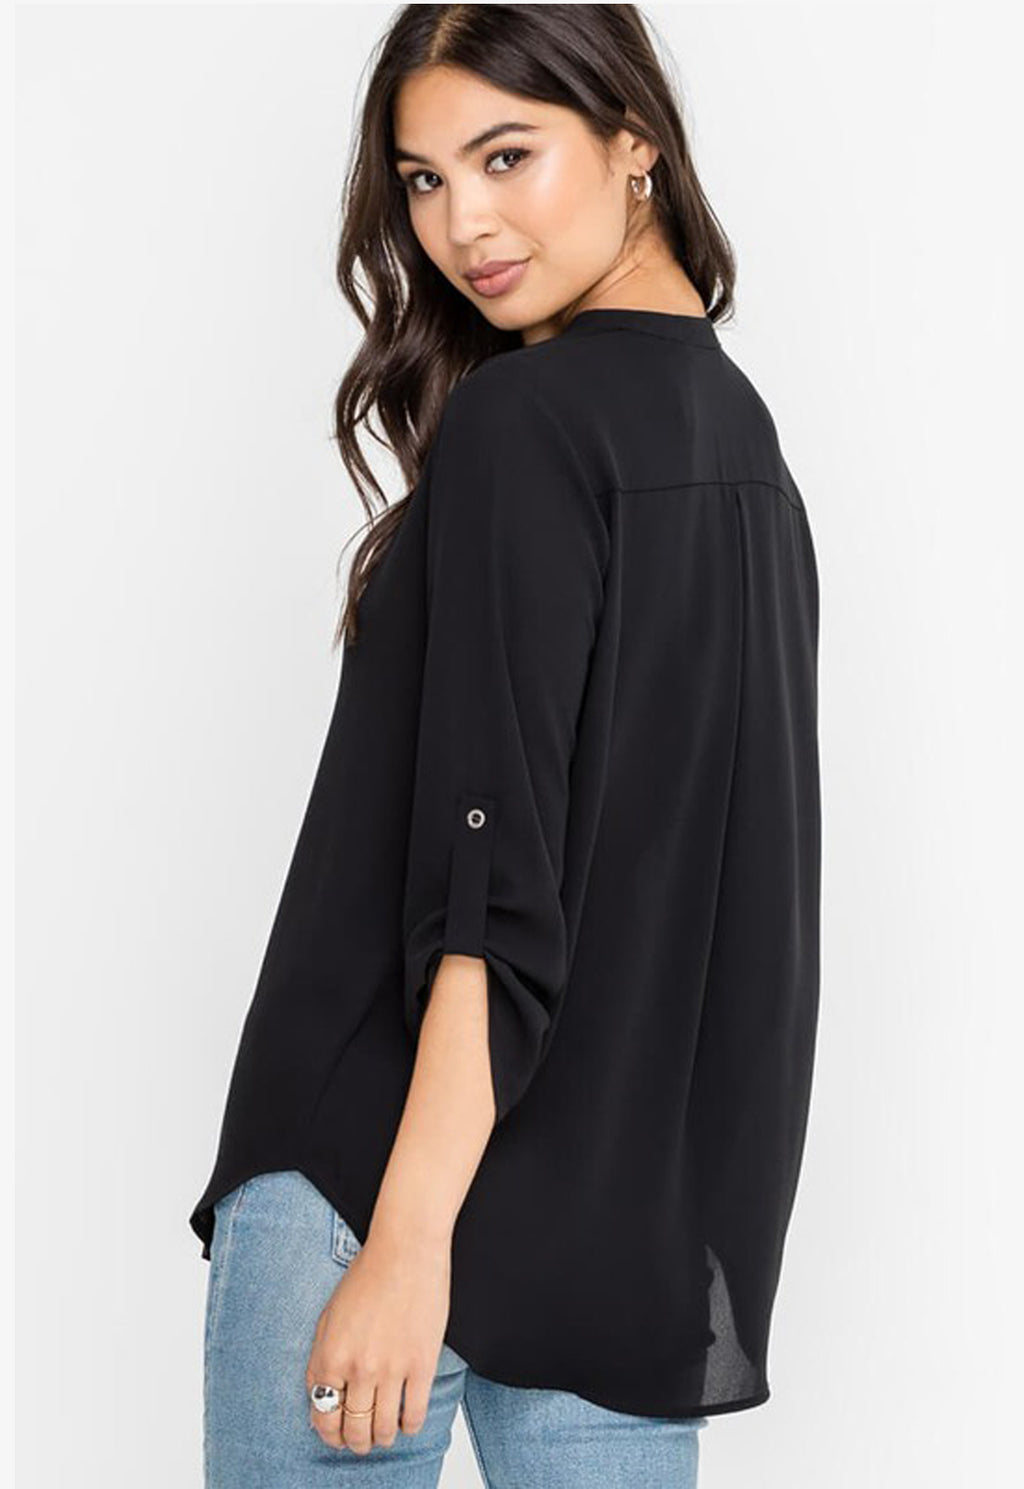 Ladies long sleeve flowy v-neck blouse in color black. By Lush Clothing